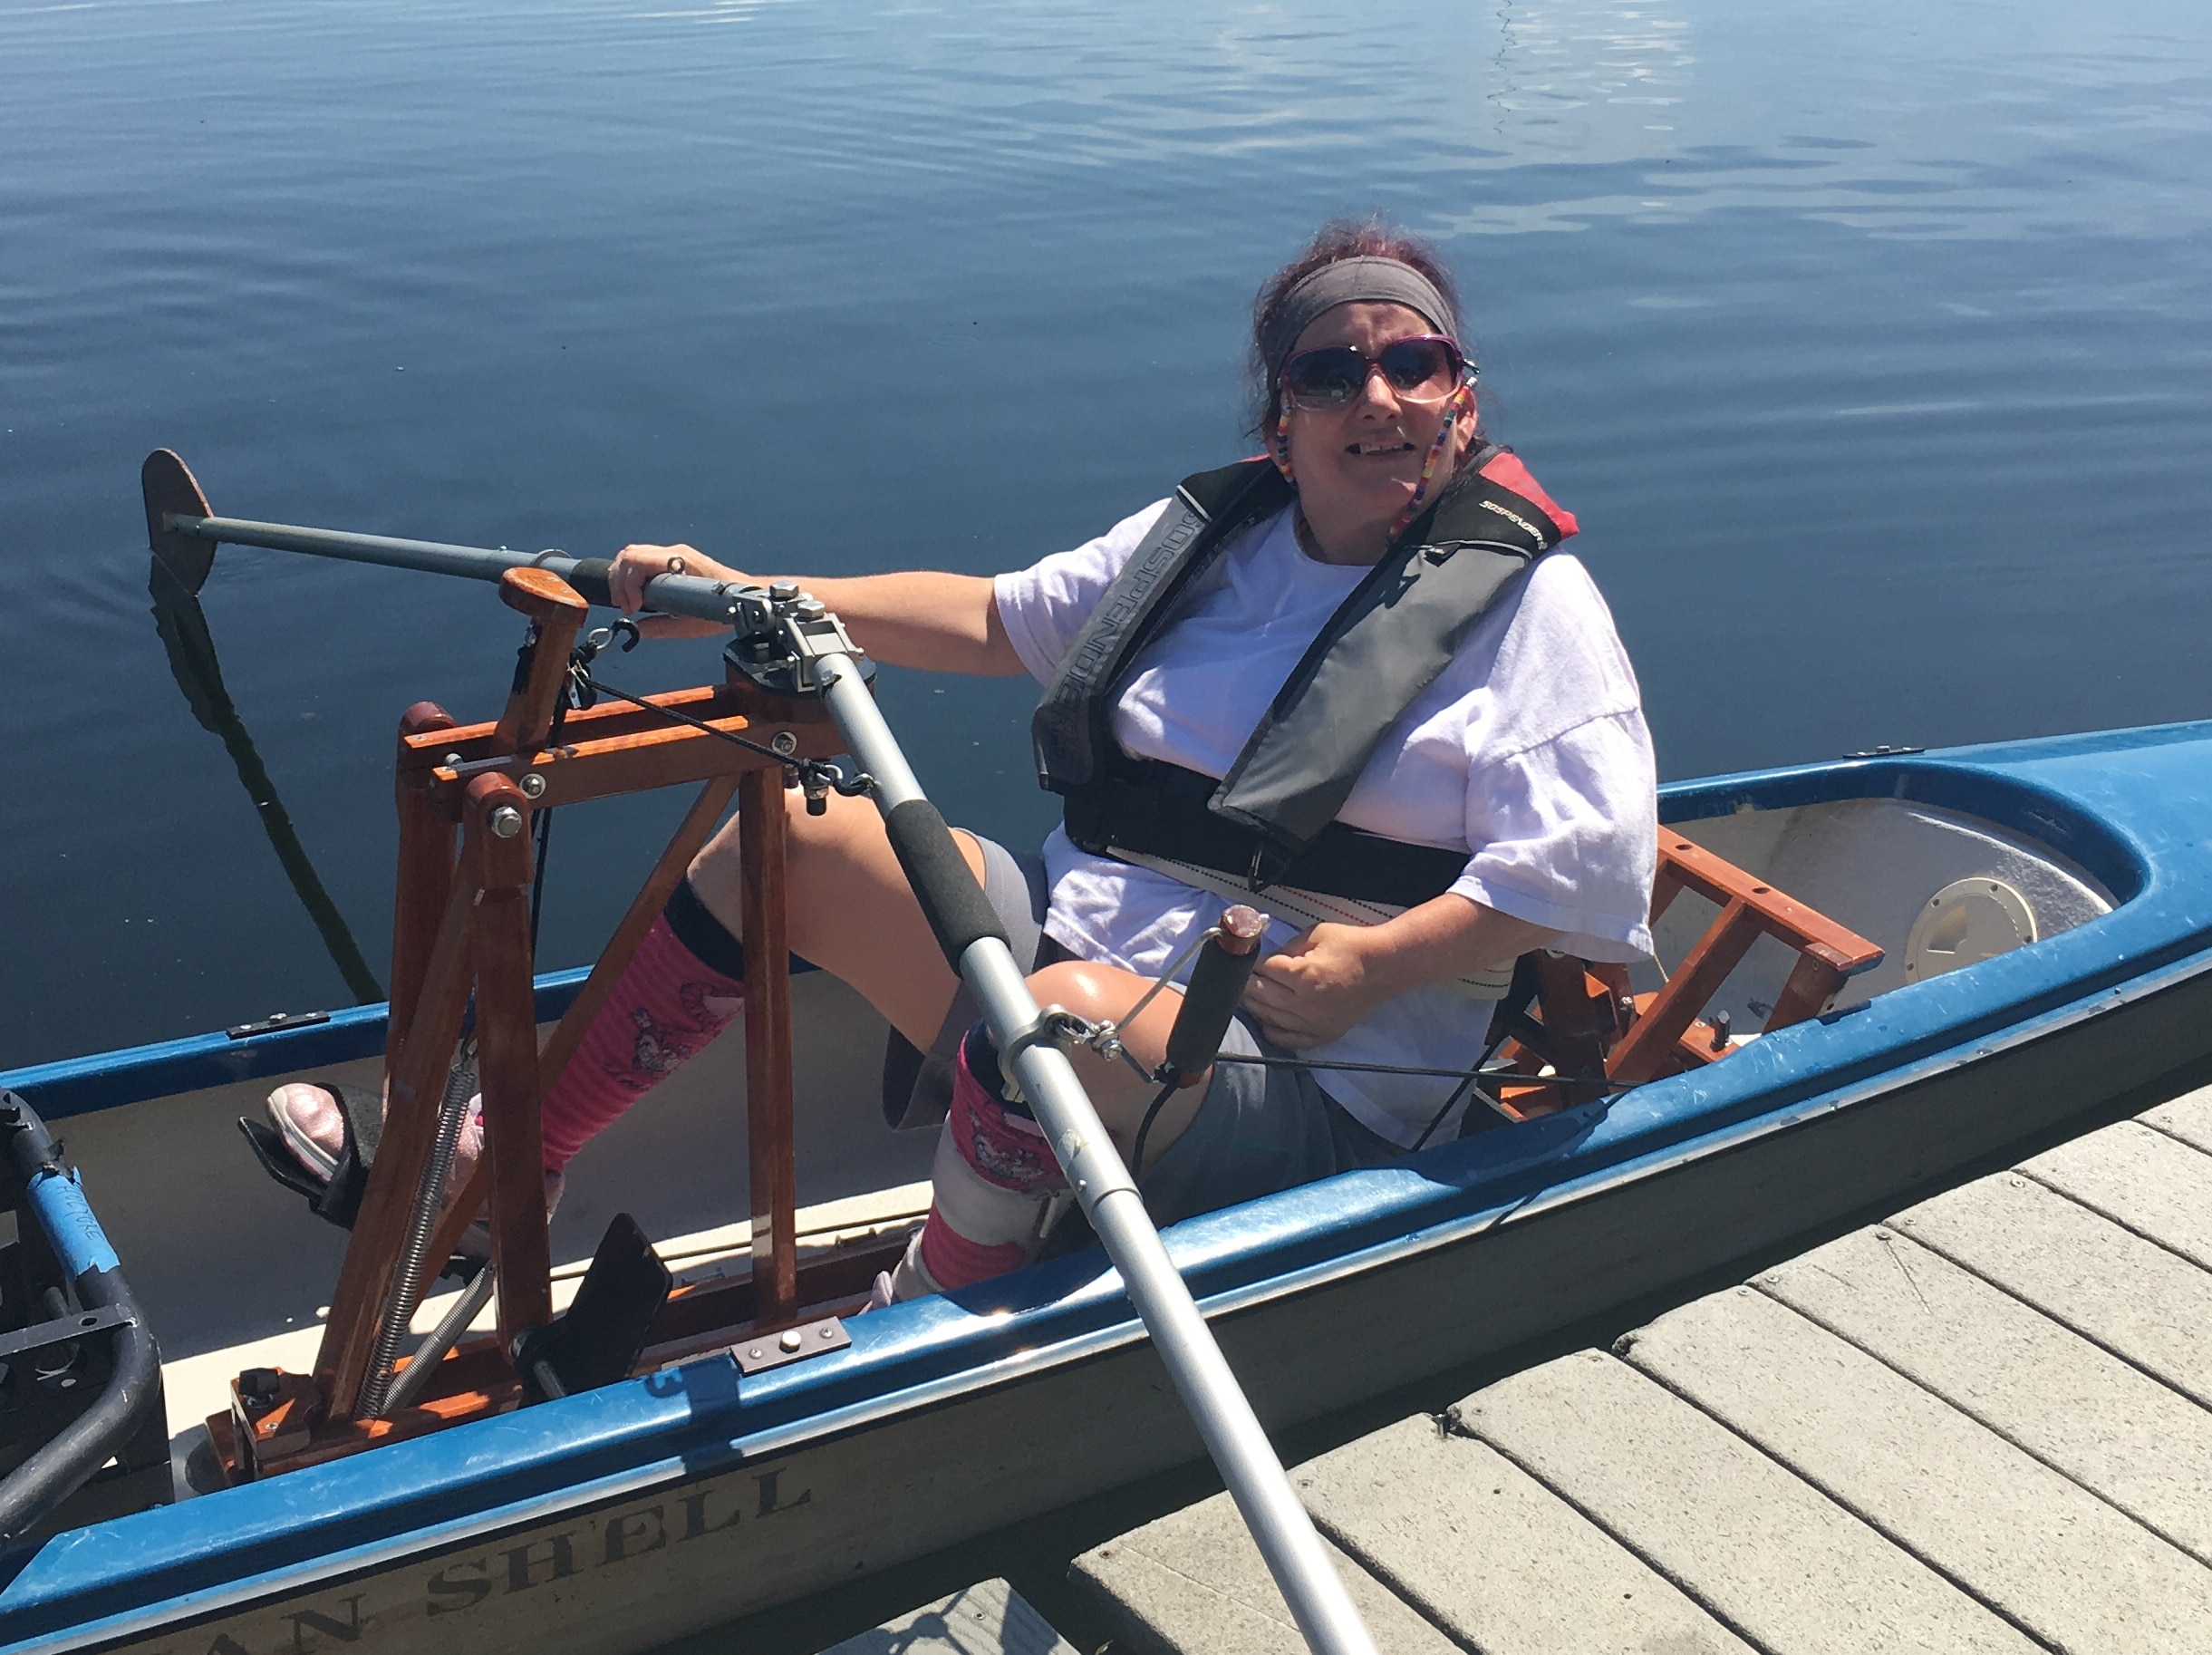 A person sits in a Frontrower in a shelll. The FrontRower is made of thin pieces of wood and raises the oars up to chest height. Footpedals attach to an arm that can move the oars.